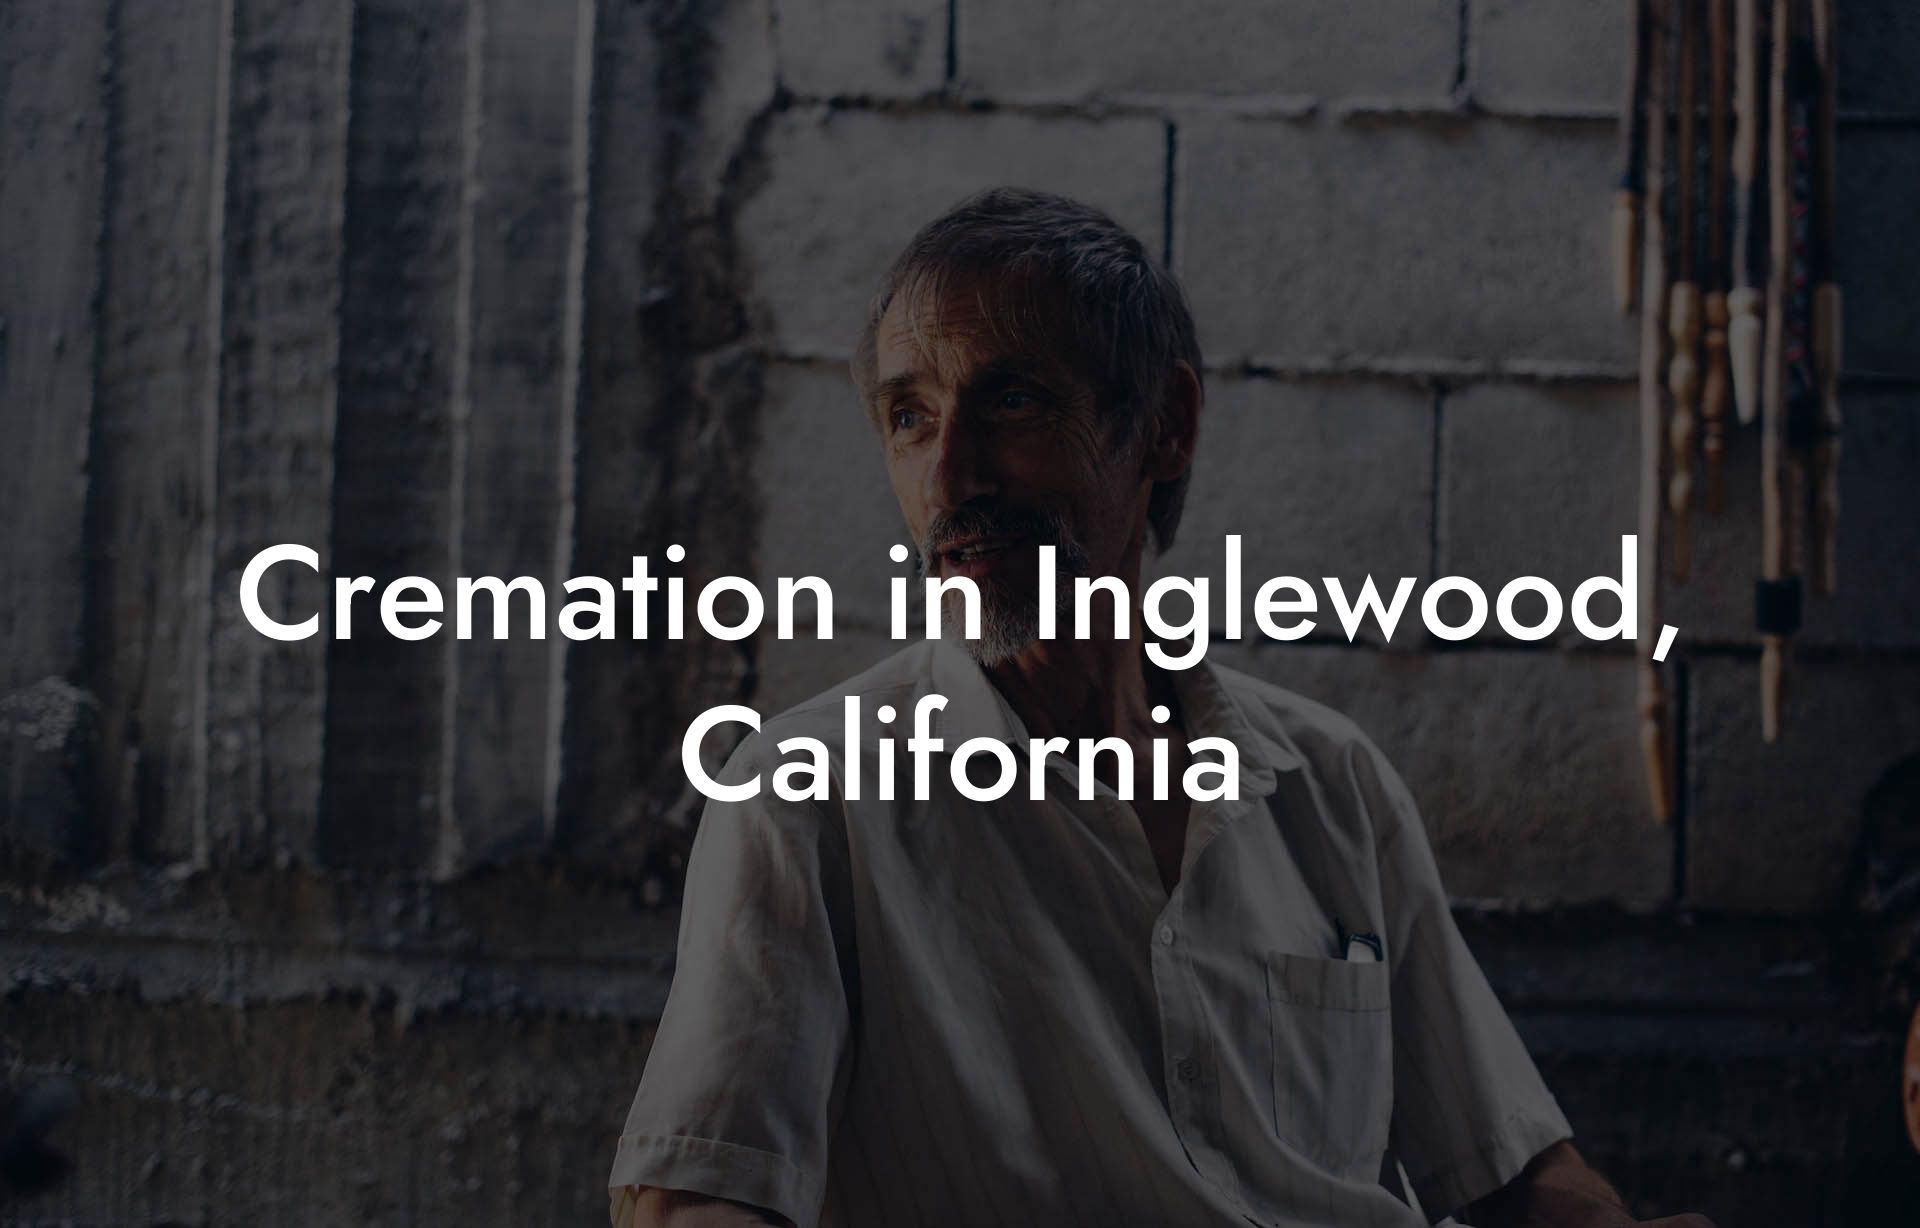 Cremation in Inglewood, California